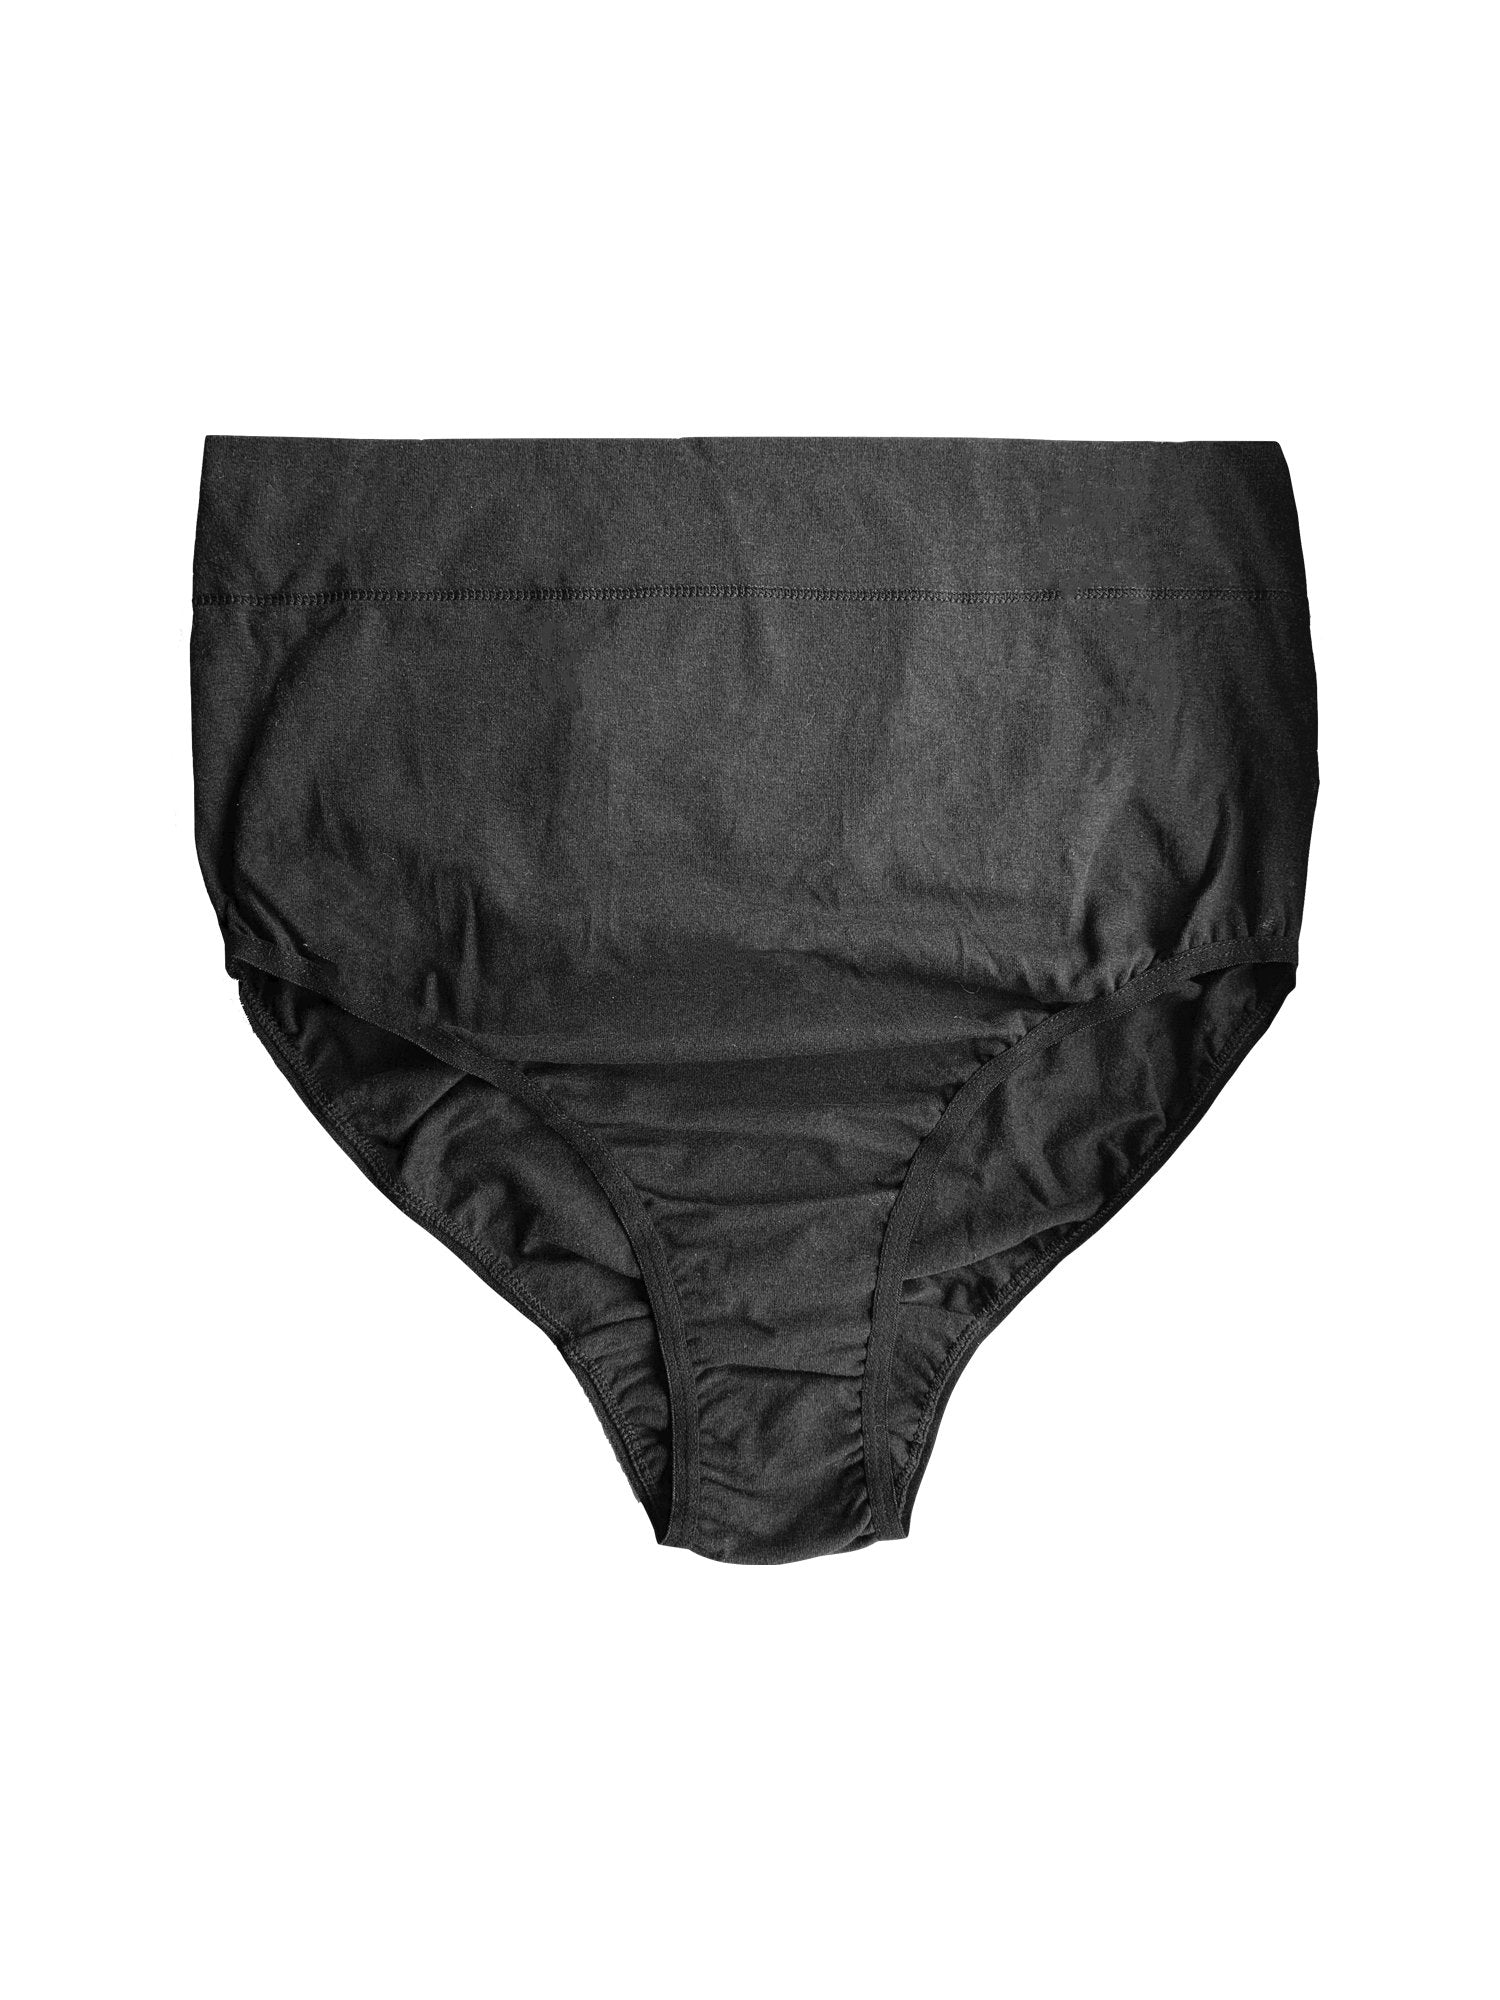 Inner Sense Organic Cotton Antimicrobial Maternity Panty - Pack of 2